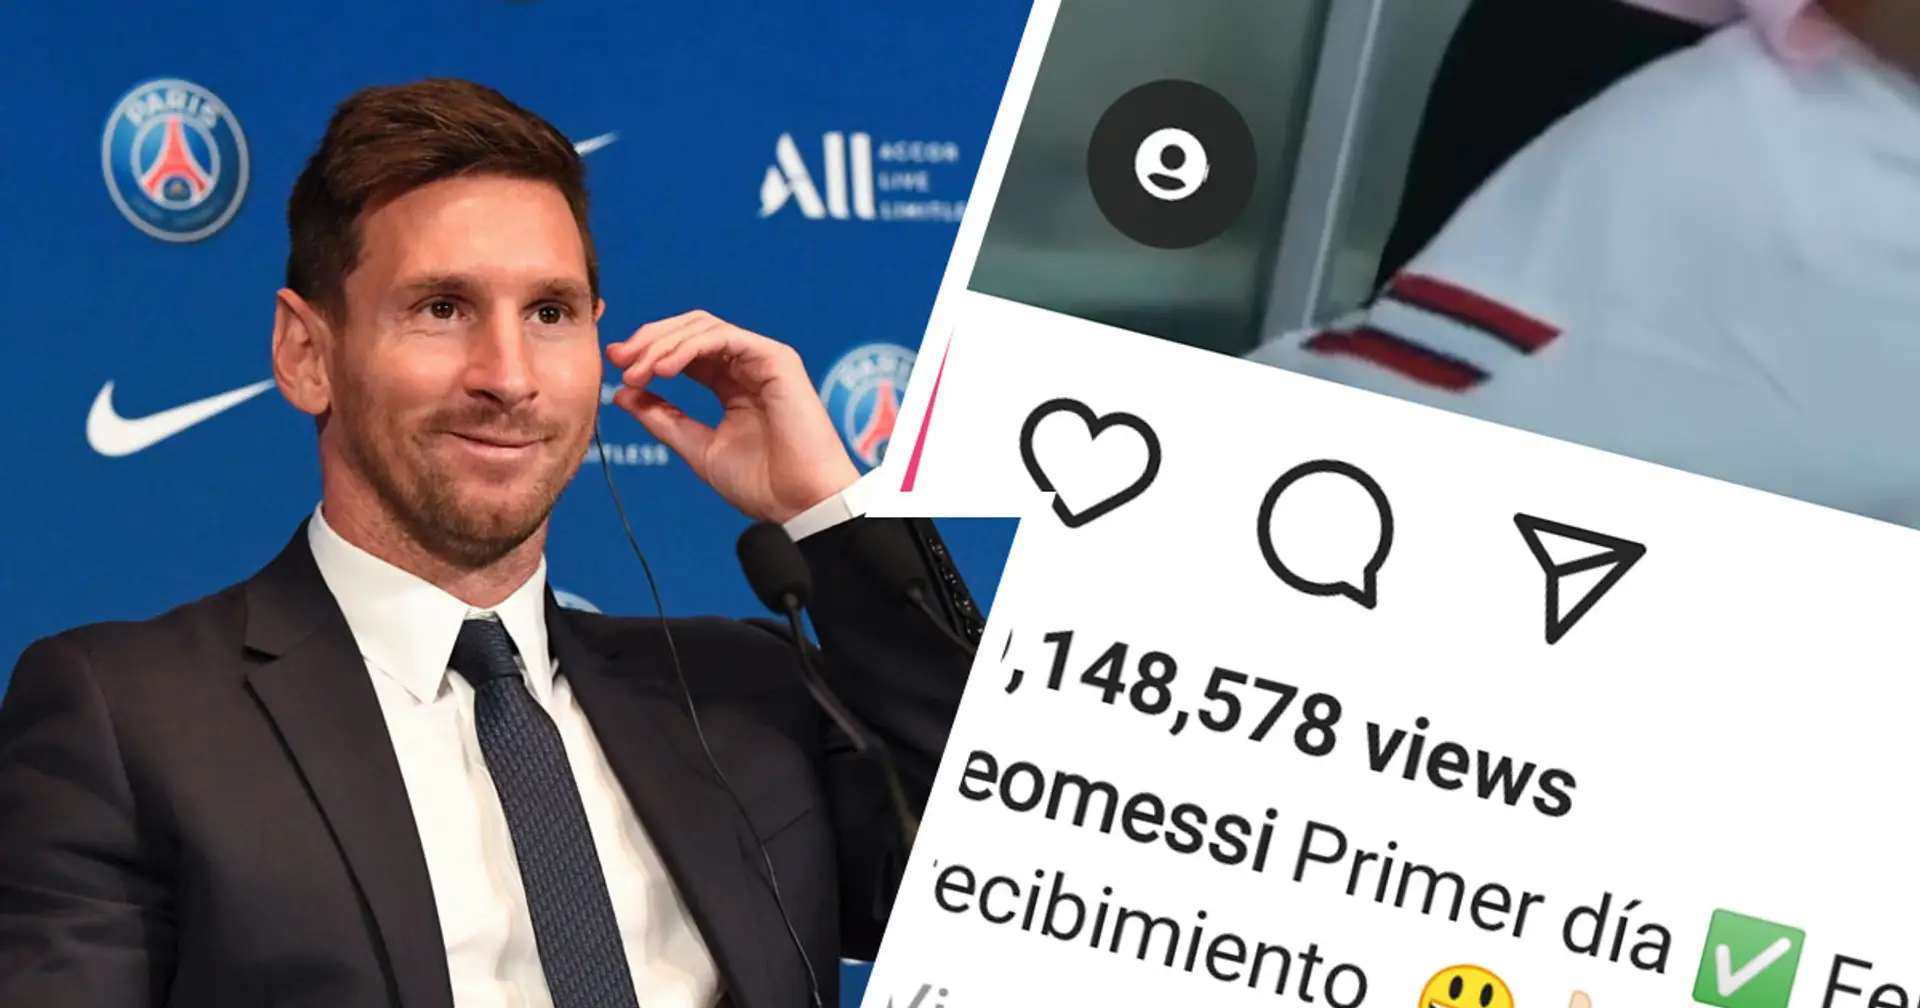 Messi sends message to fans after 1st PSG training session